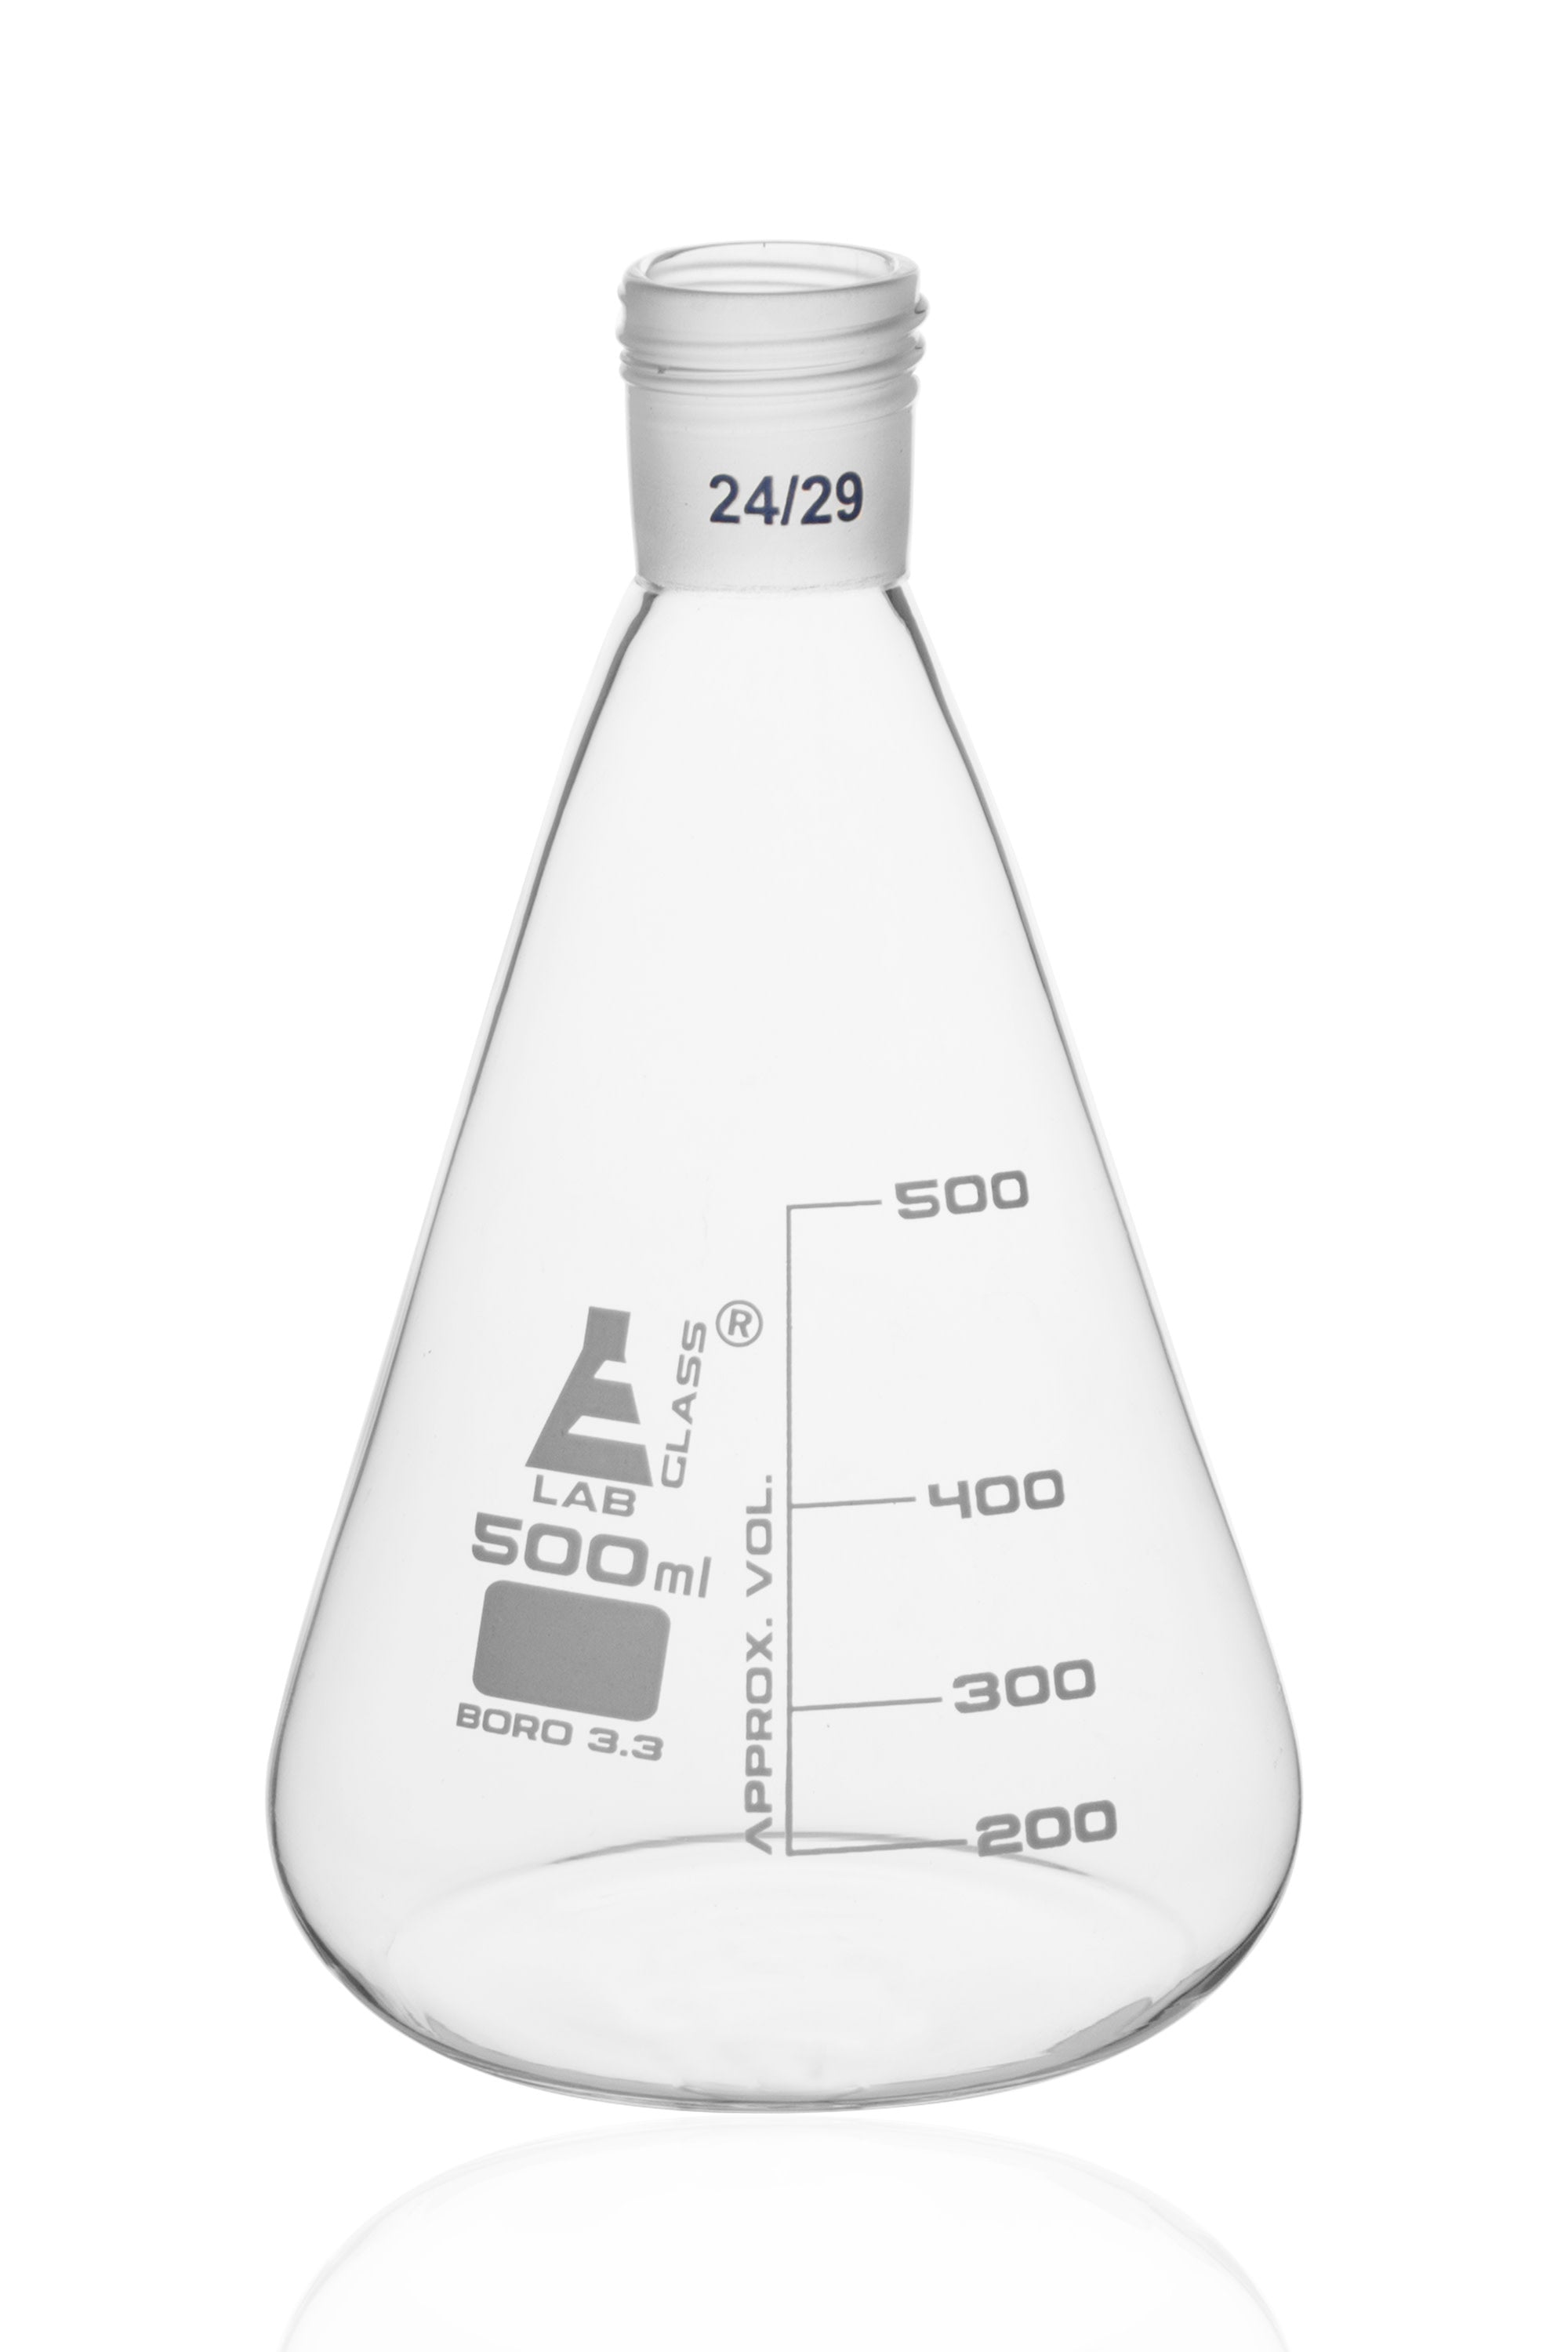 Borosilicate Glass Erlenmeyer Flask with 24/29 Screw Thread Neck Joint, 500 ml, 100 ml Graduations, Autoclavable